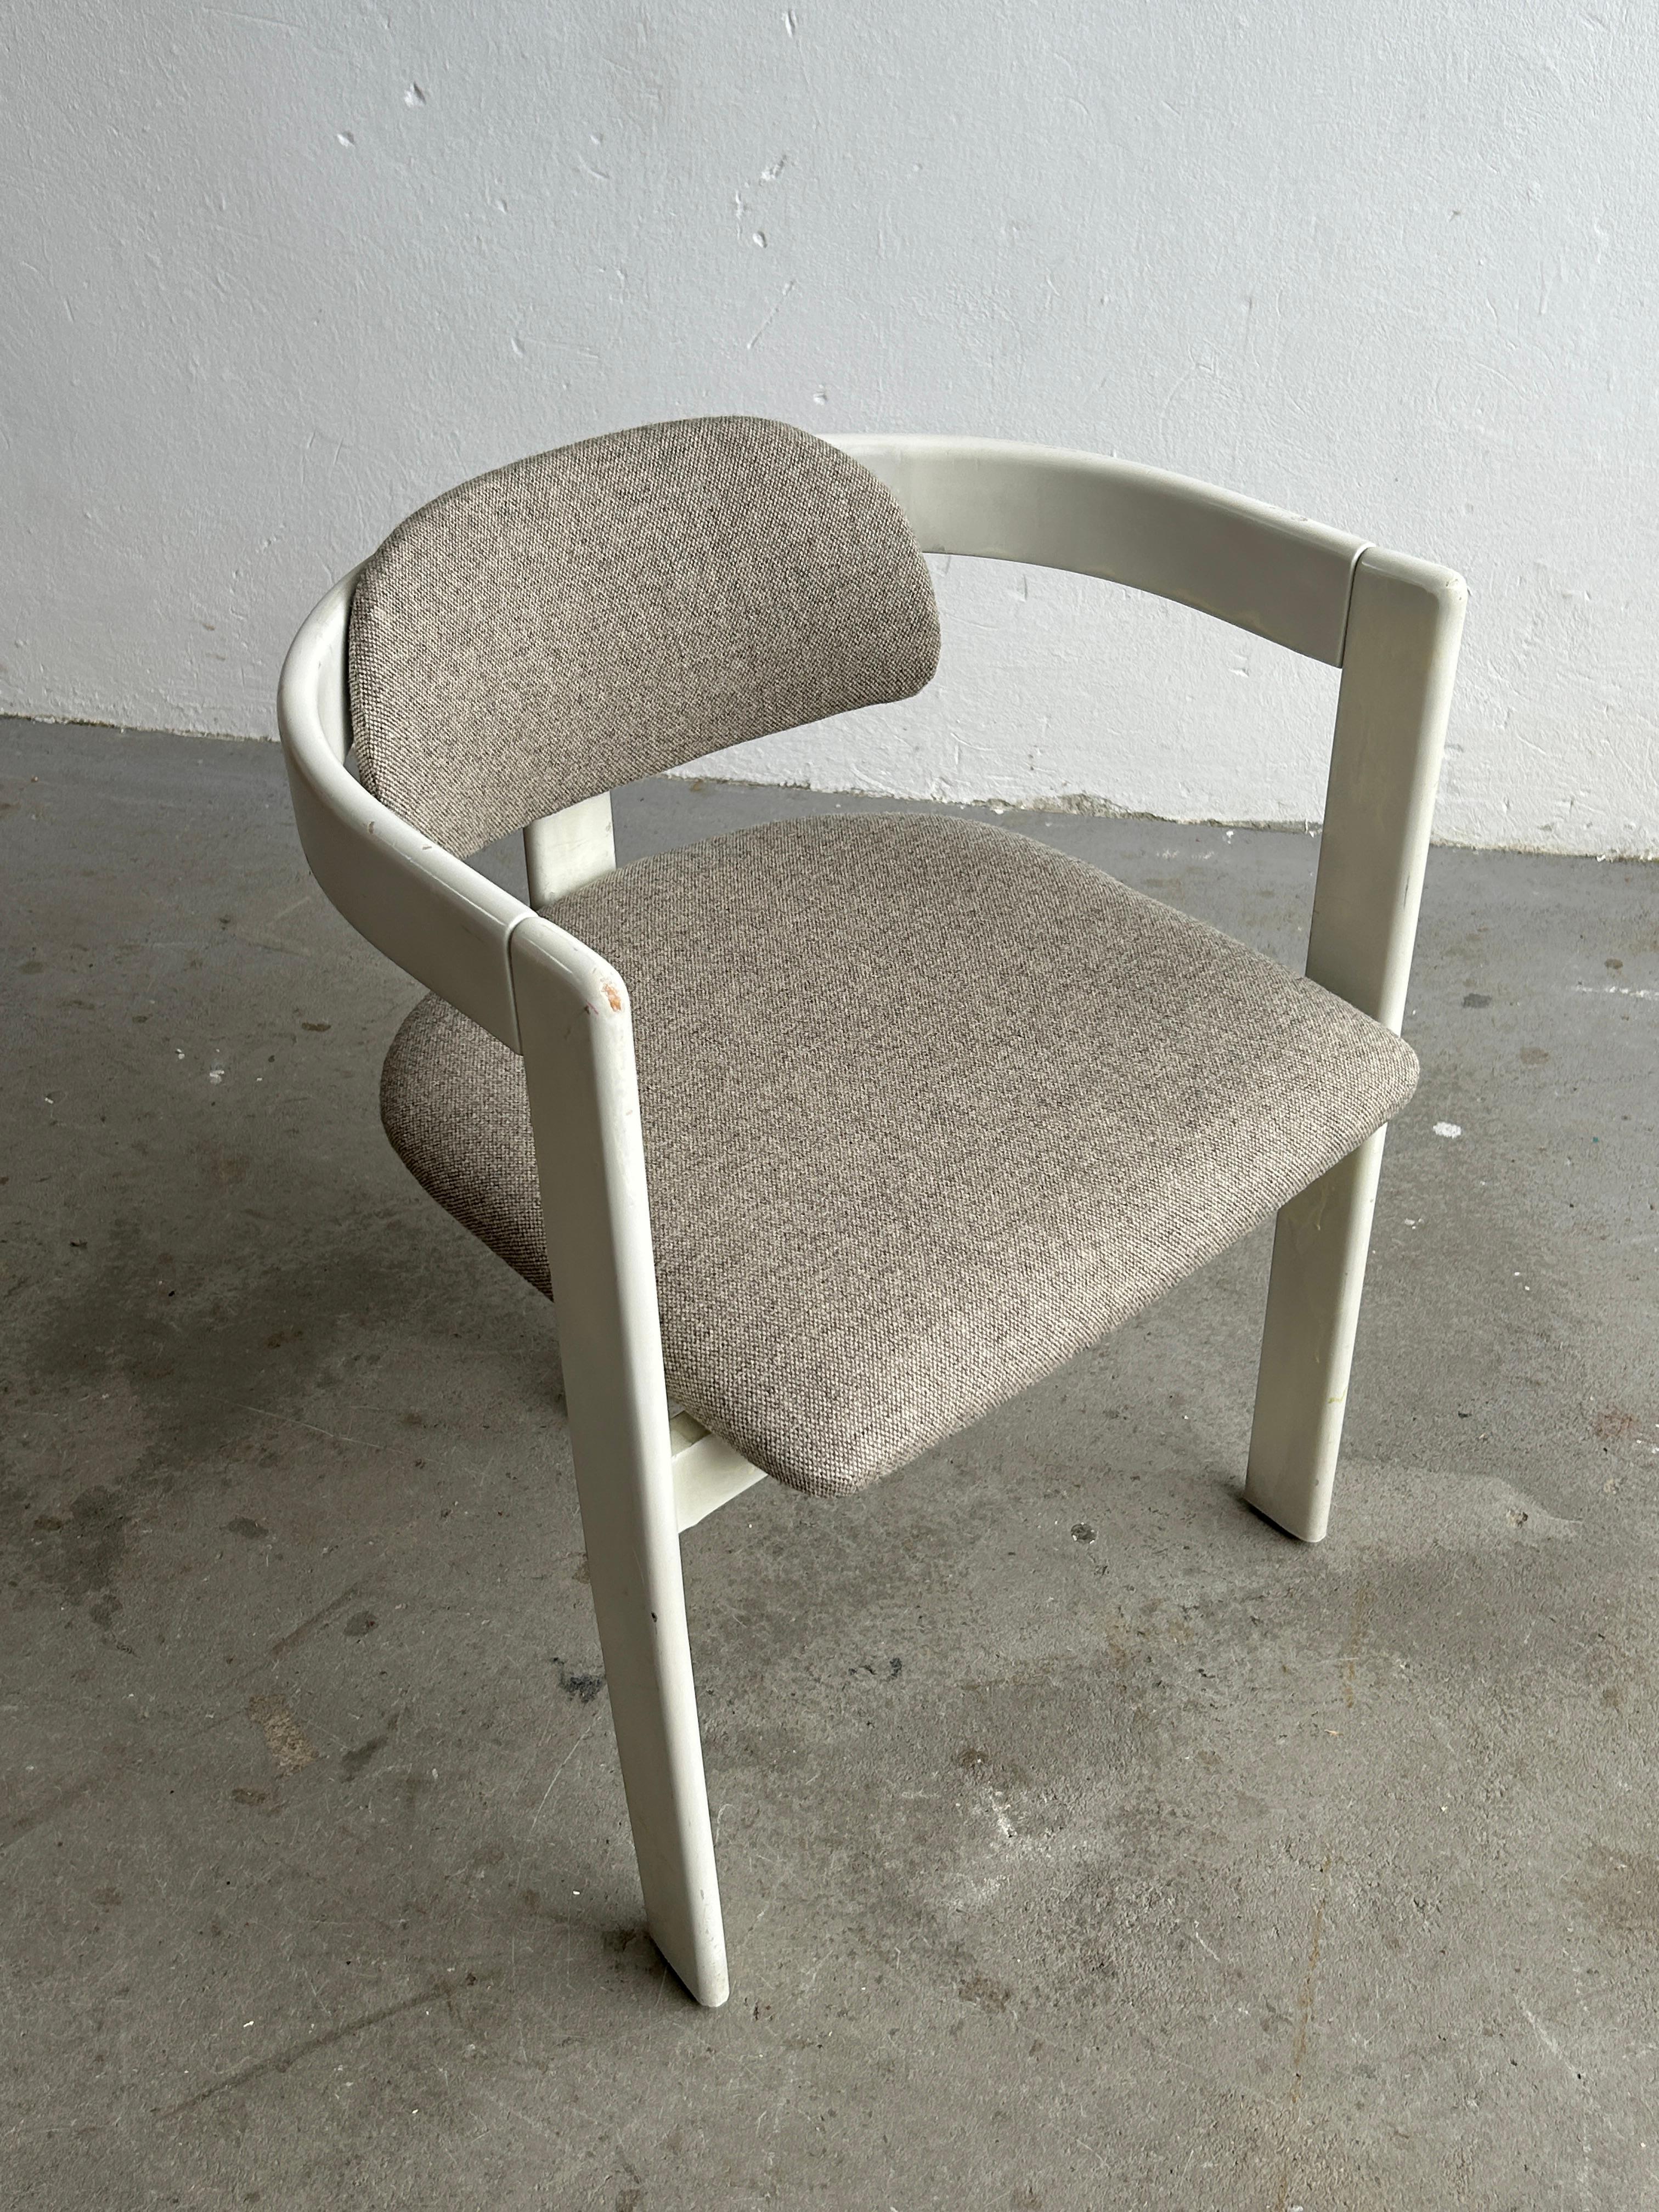 Vintage Dining Chair in Style of 'Pamplona' Chair by Augusto Savini for Pozzi 1